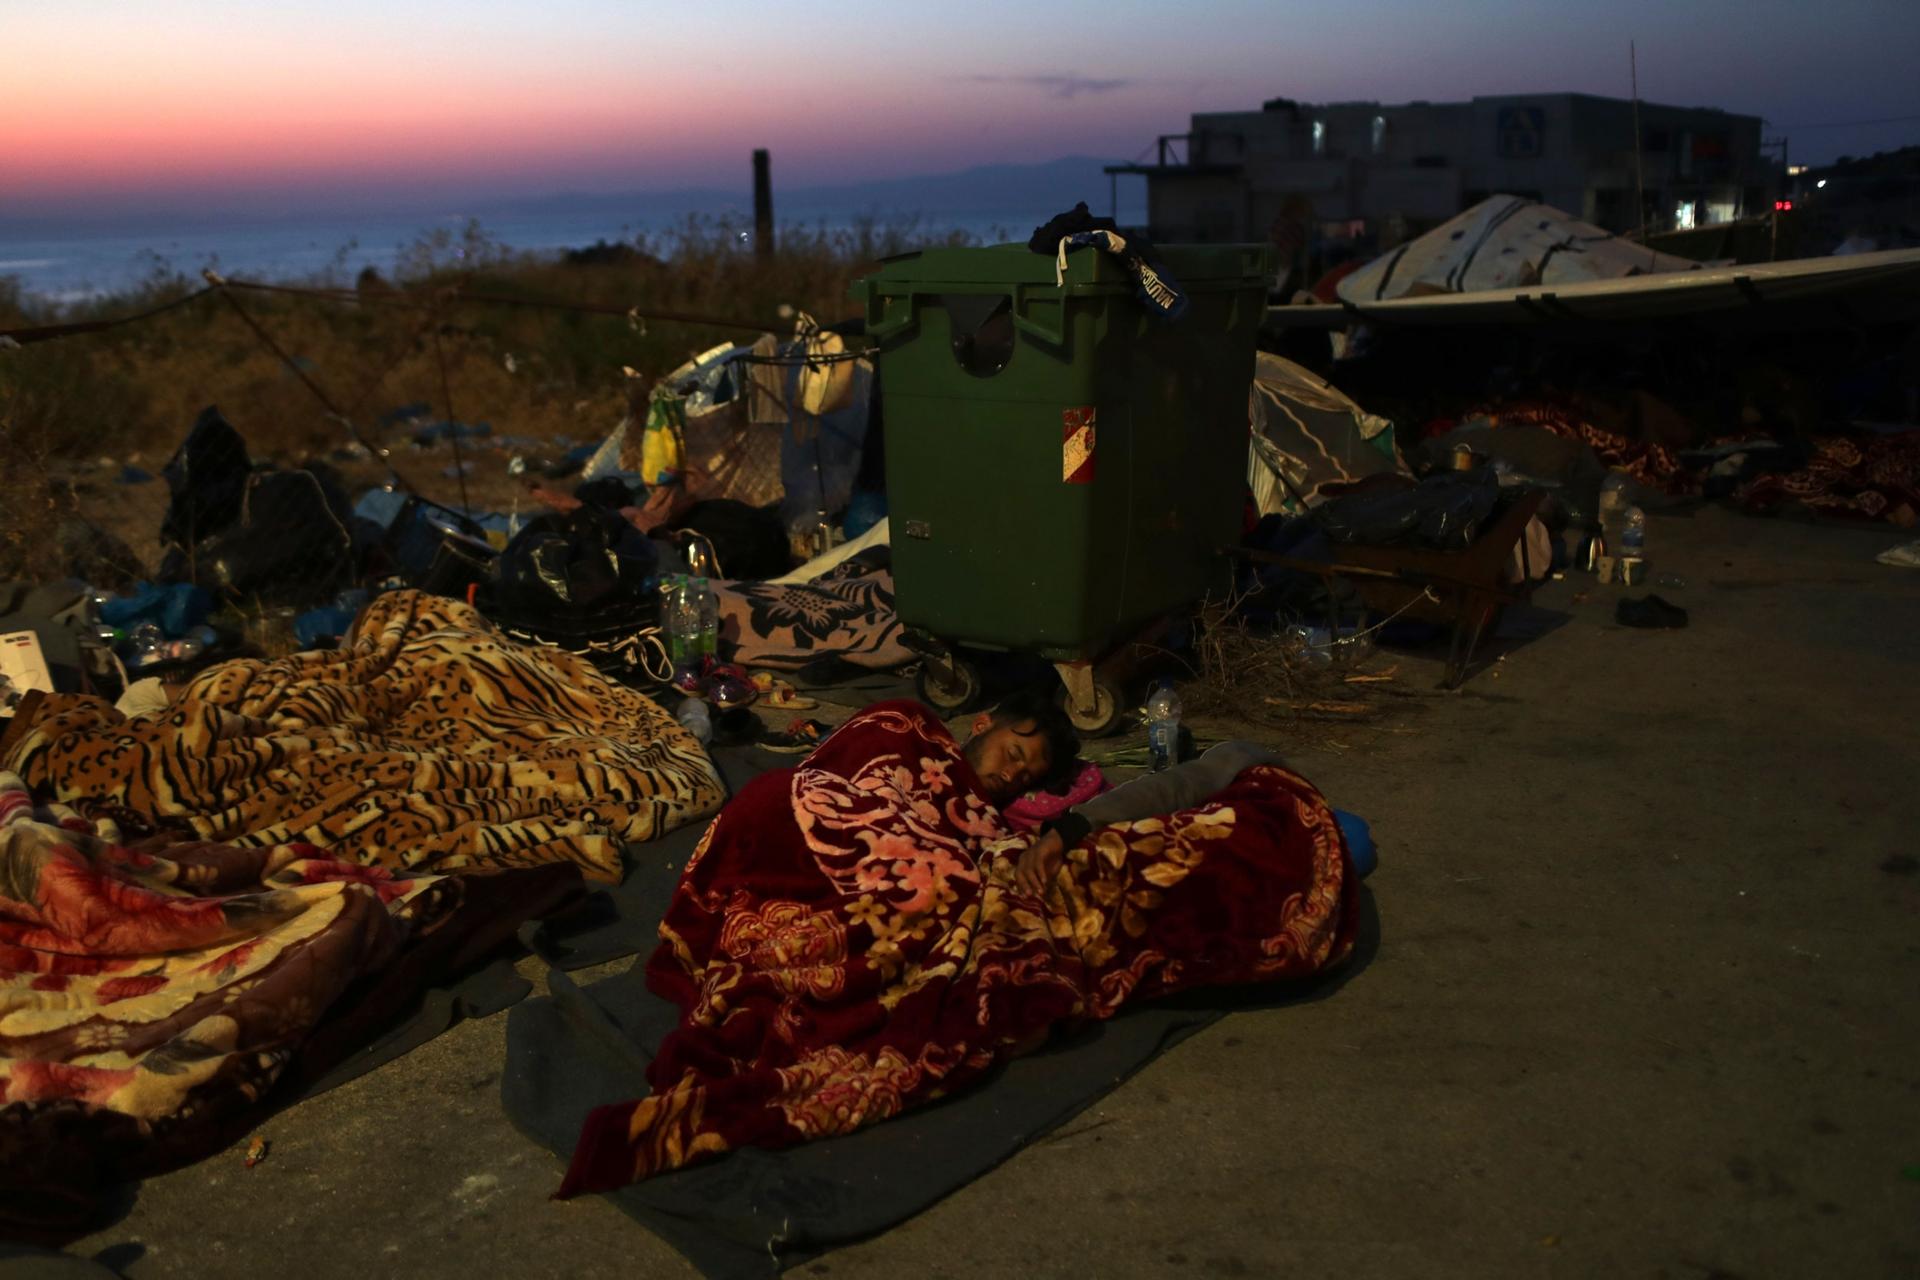 Several migrants and refugees are shown sleeping under blankets on the side of a road with a green trash bin with wheels nearby. 